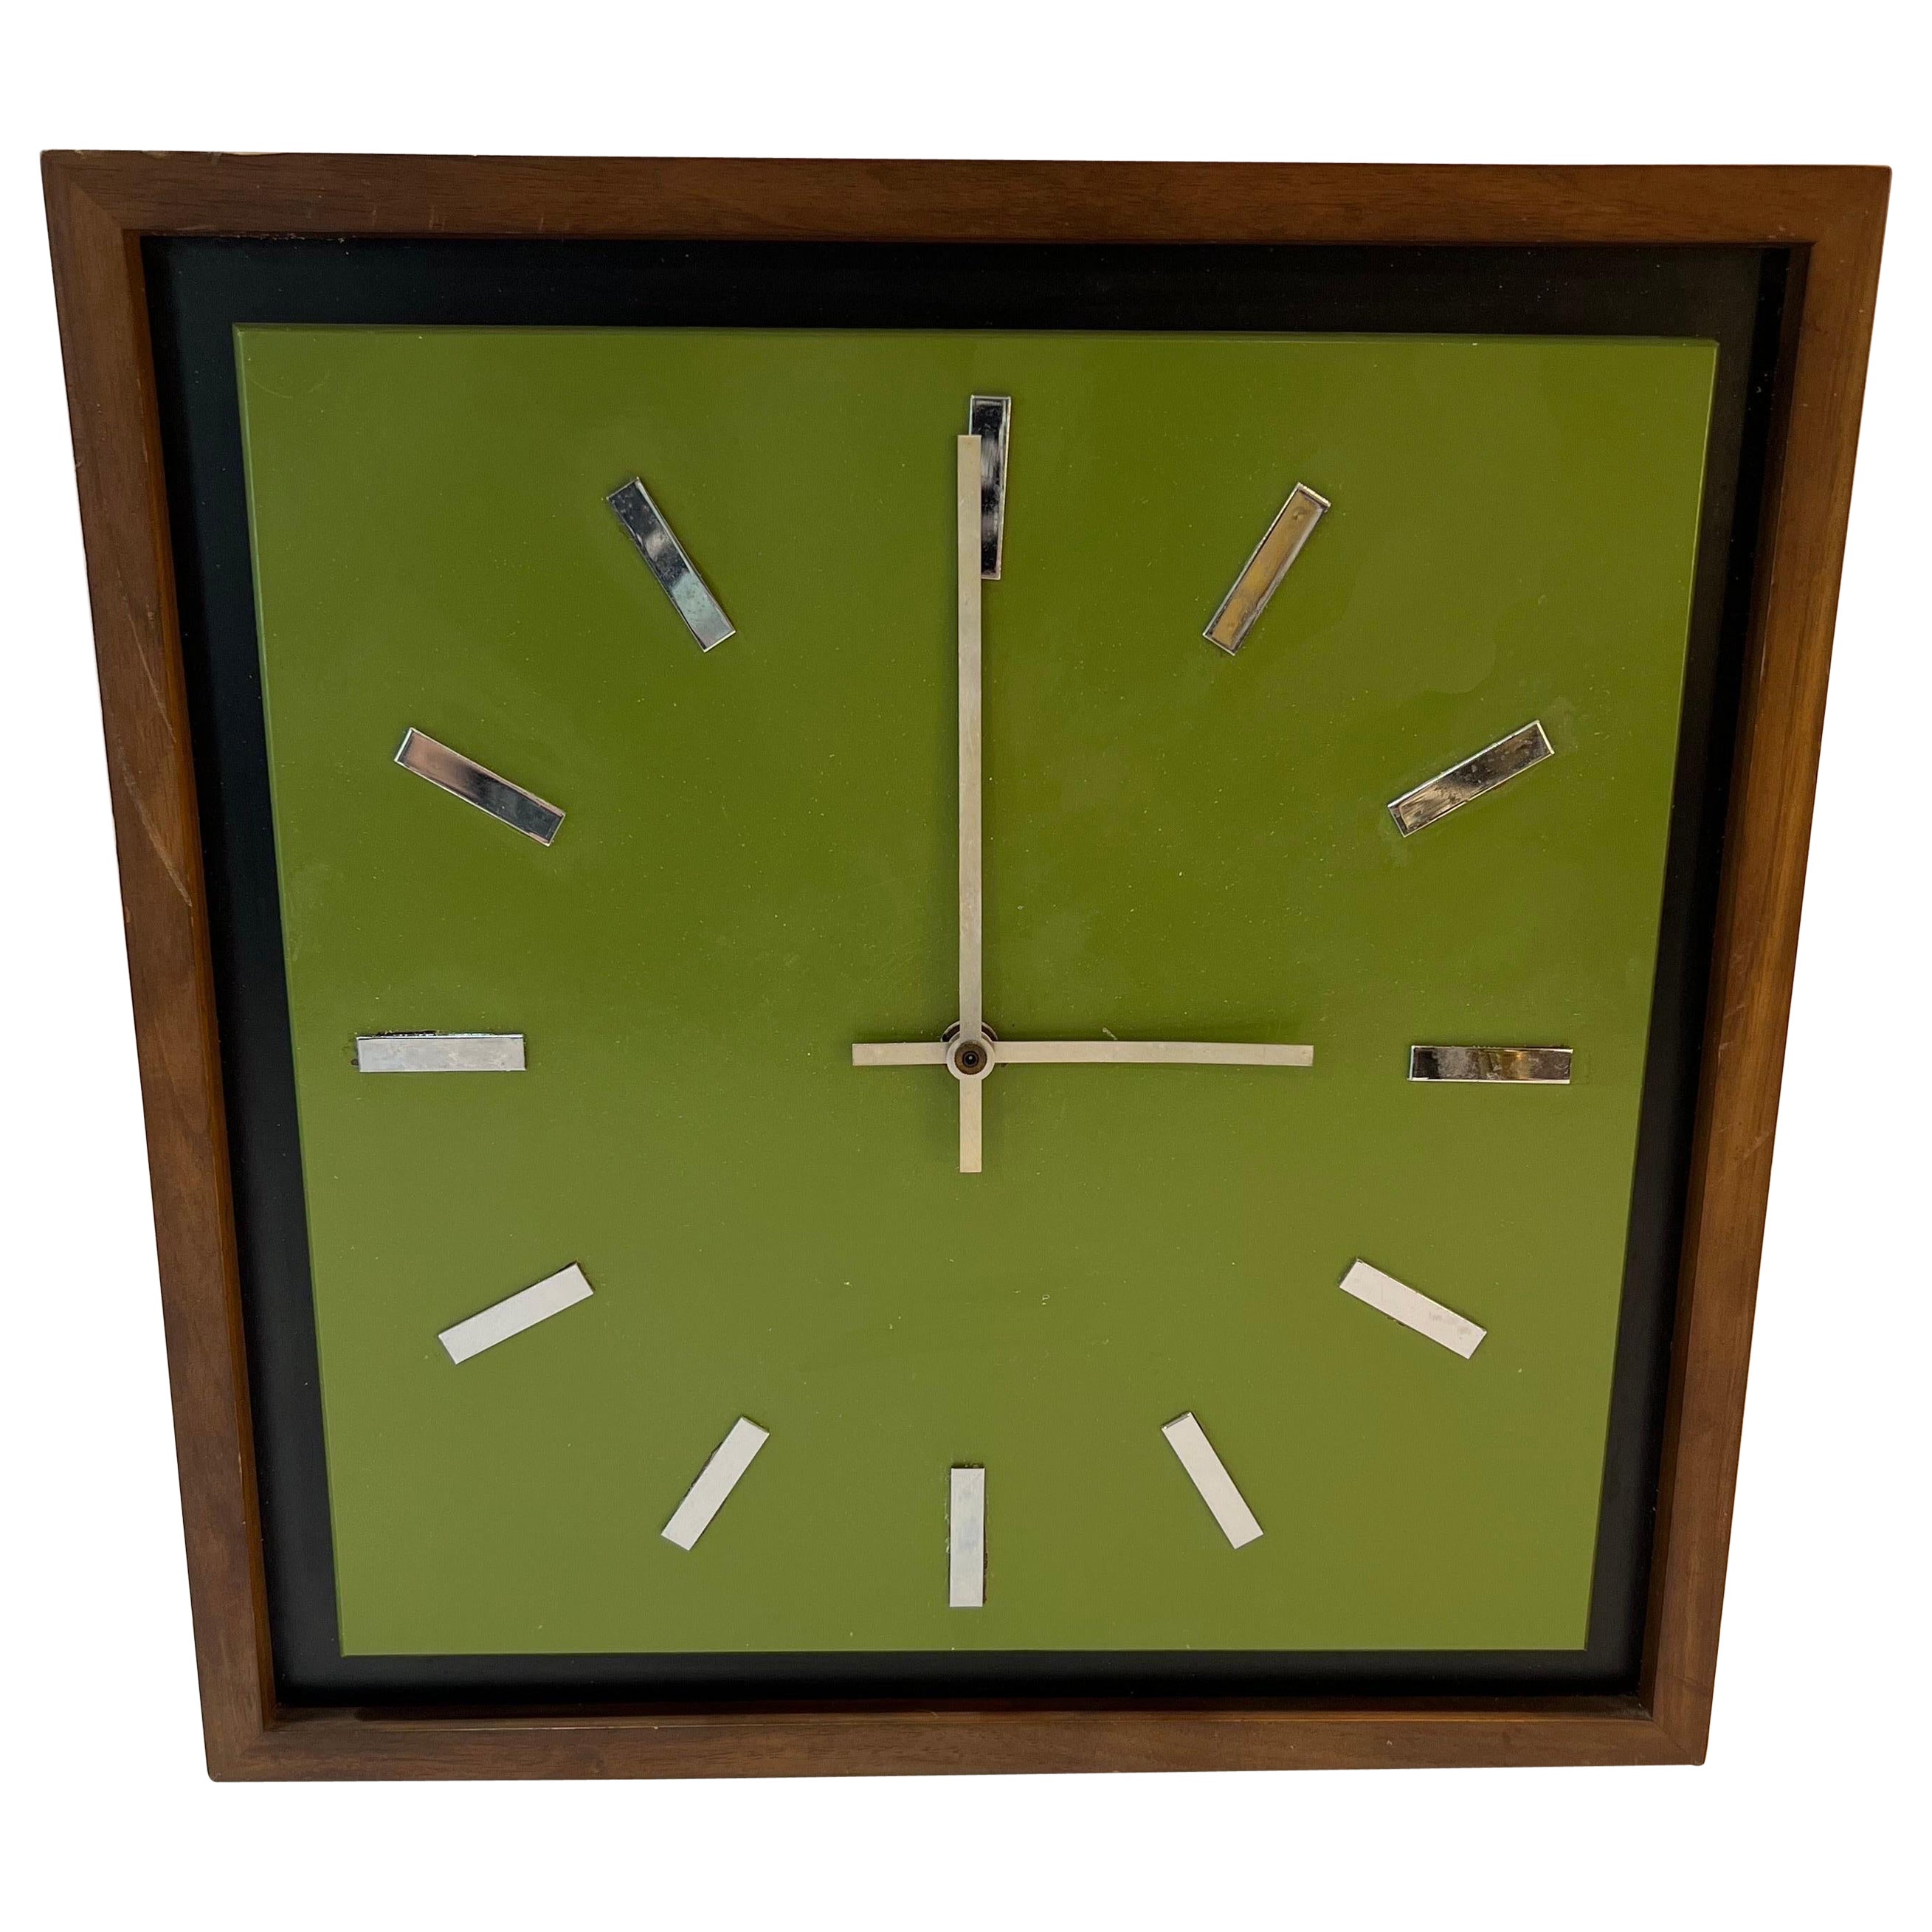 Mid Century Peter Pepper Products Wall Clock